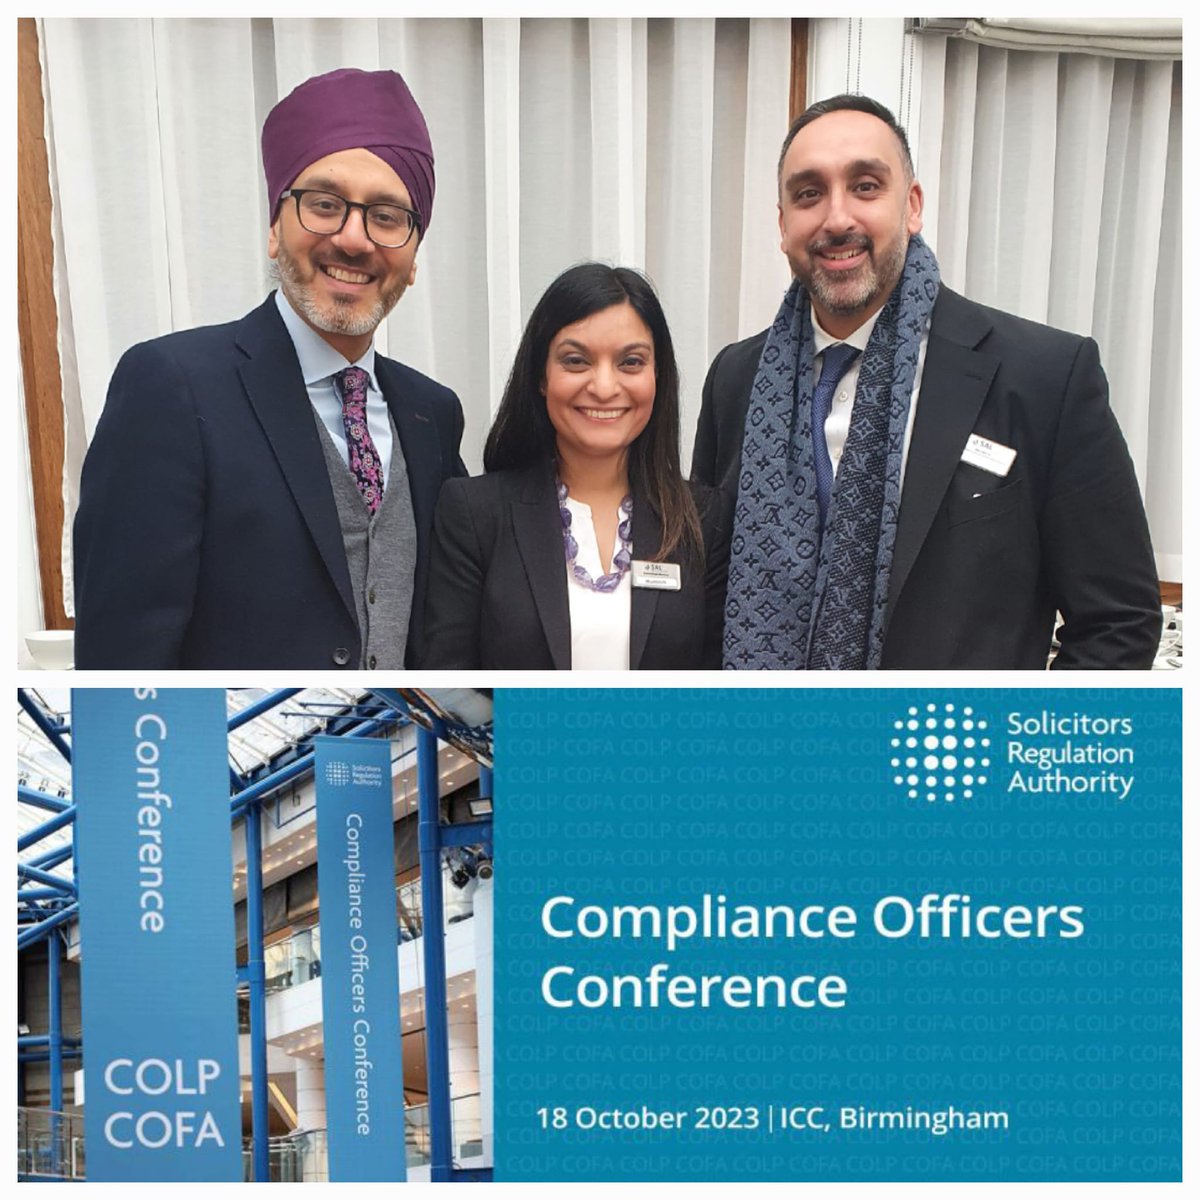 Come and see us at Stall 23 tomorrow at the @sra_solicitors Compliance Officers Conference. We'll be giving away 2 tickets to the Asian Legal Awards which is taking place on 25.11.23. @AttiqMalik001
@muntechkaur  #COLPCOFA #Compliance #diversity #seeitbeit